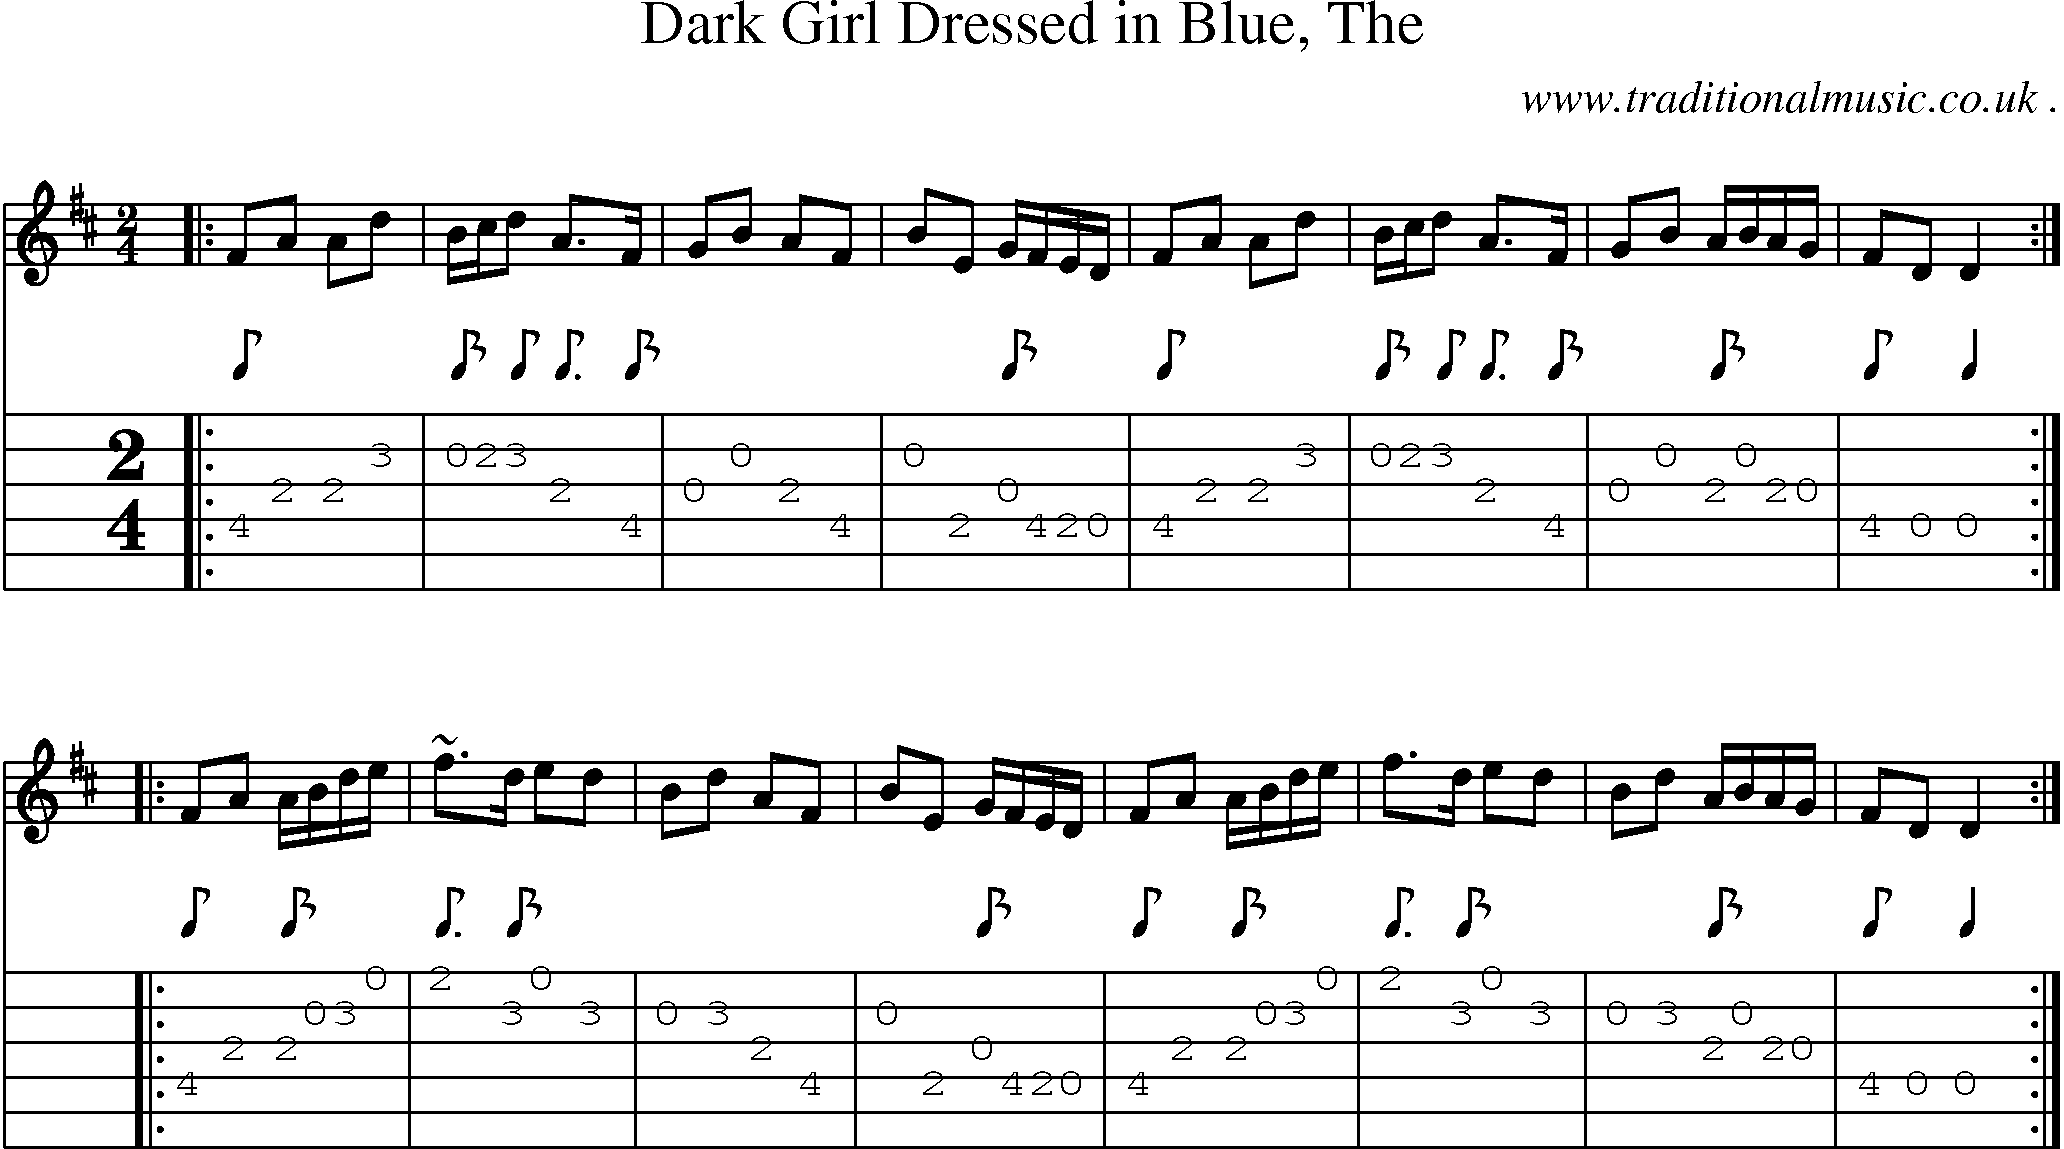 Sheet-music  score, Chords and Guitar Tabs for Dark Girl Dressed In Blue The